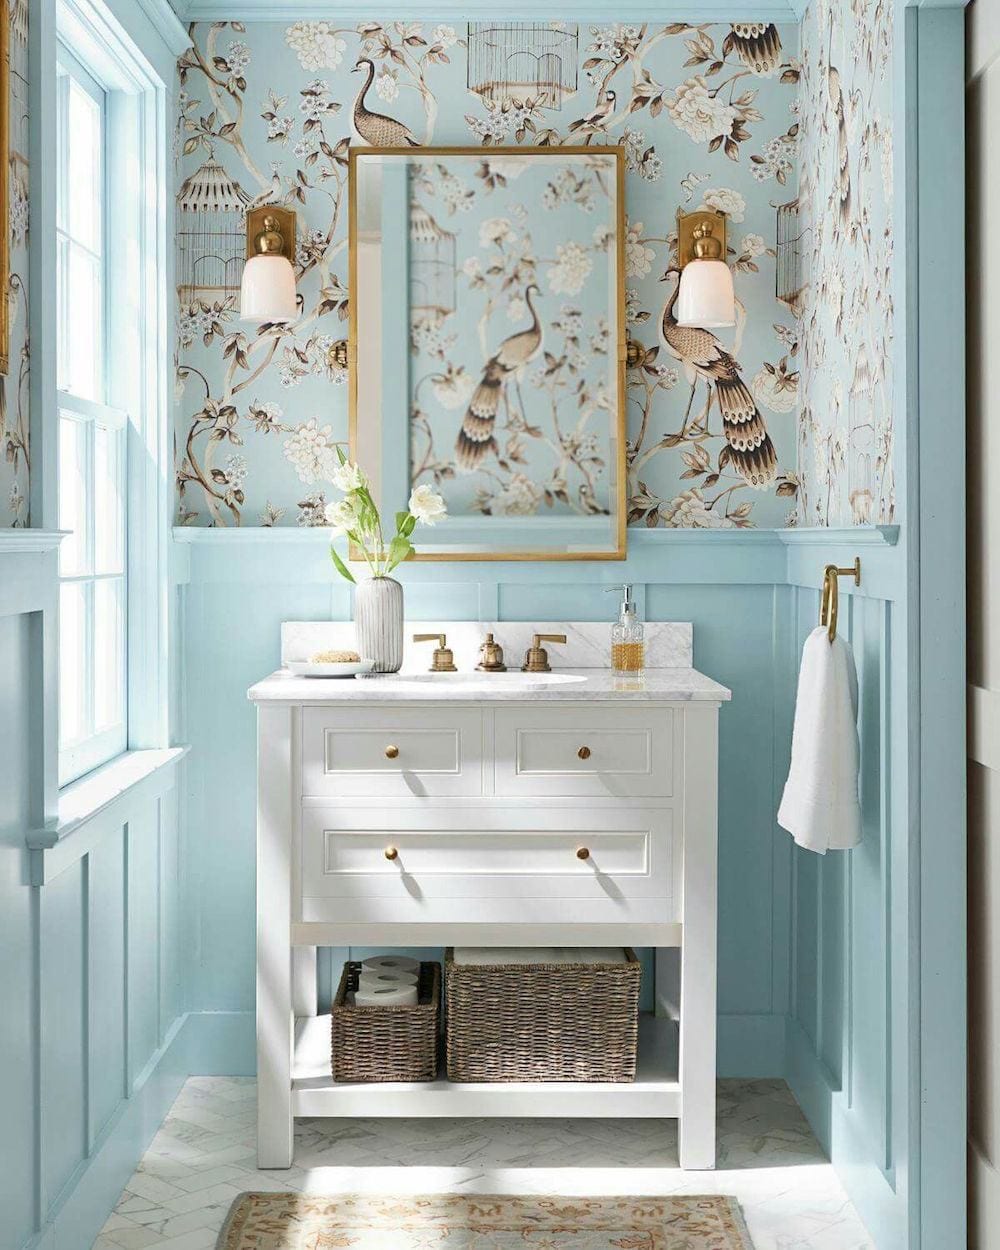 Pottery Barn cool blue and white bathroom - best pale blue paint colors